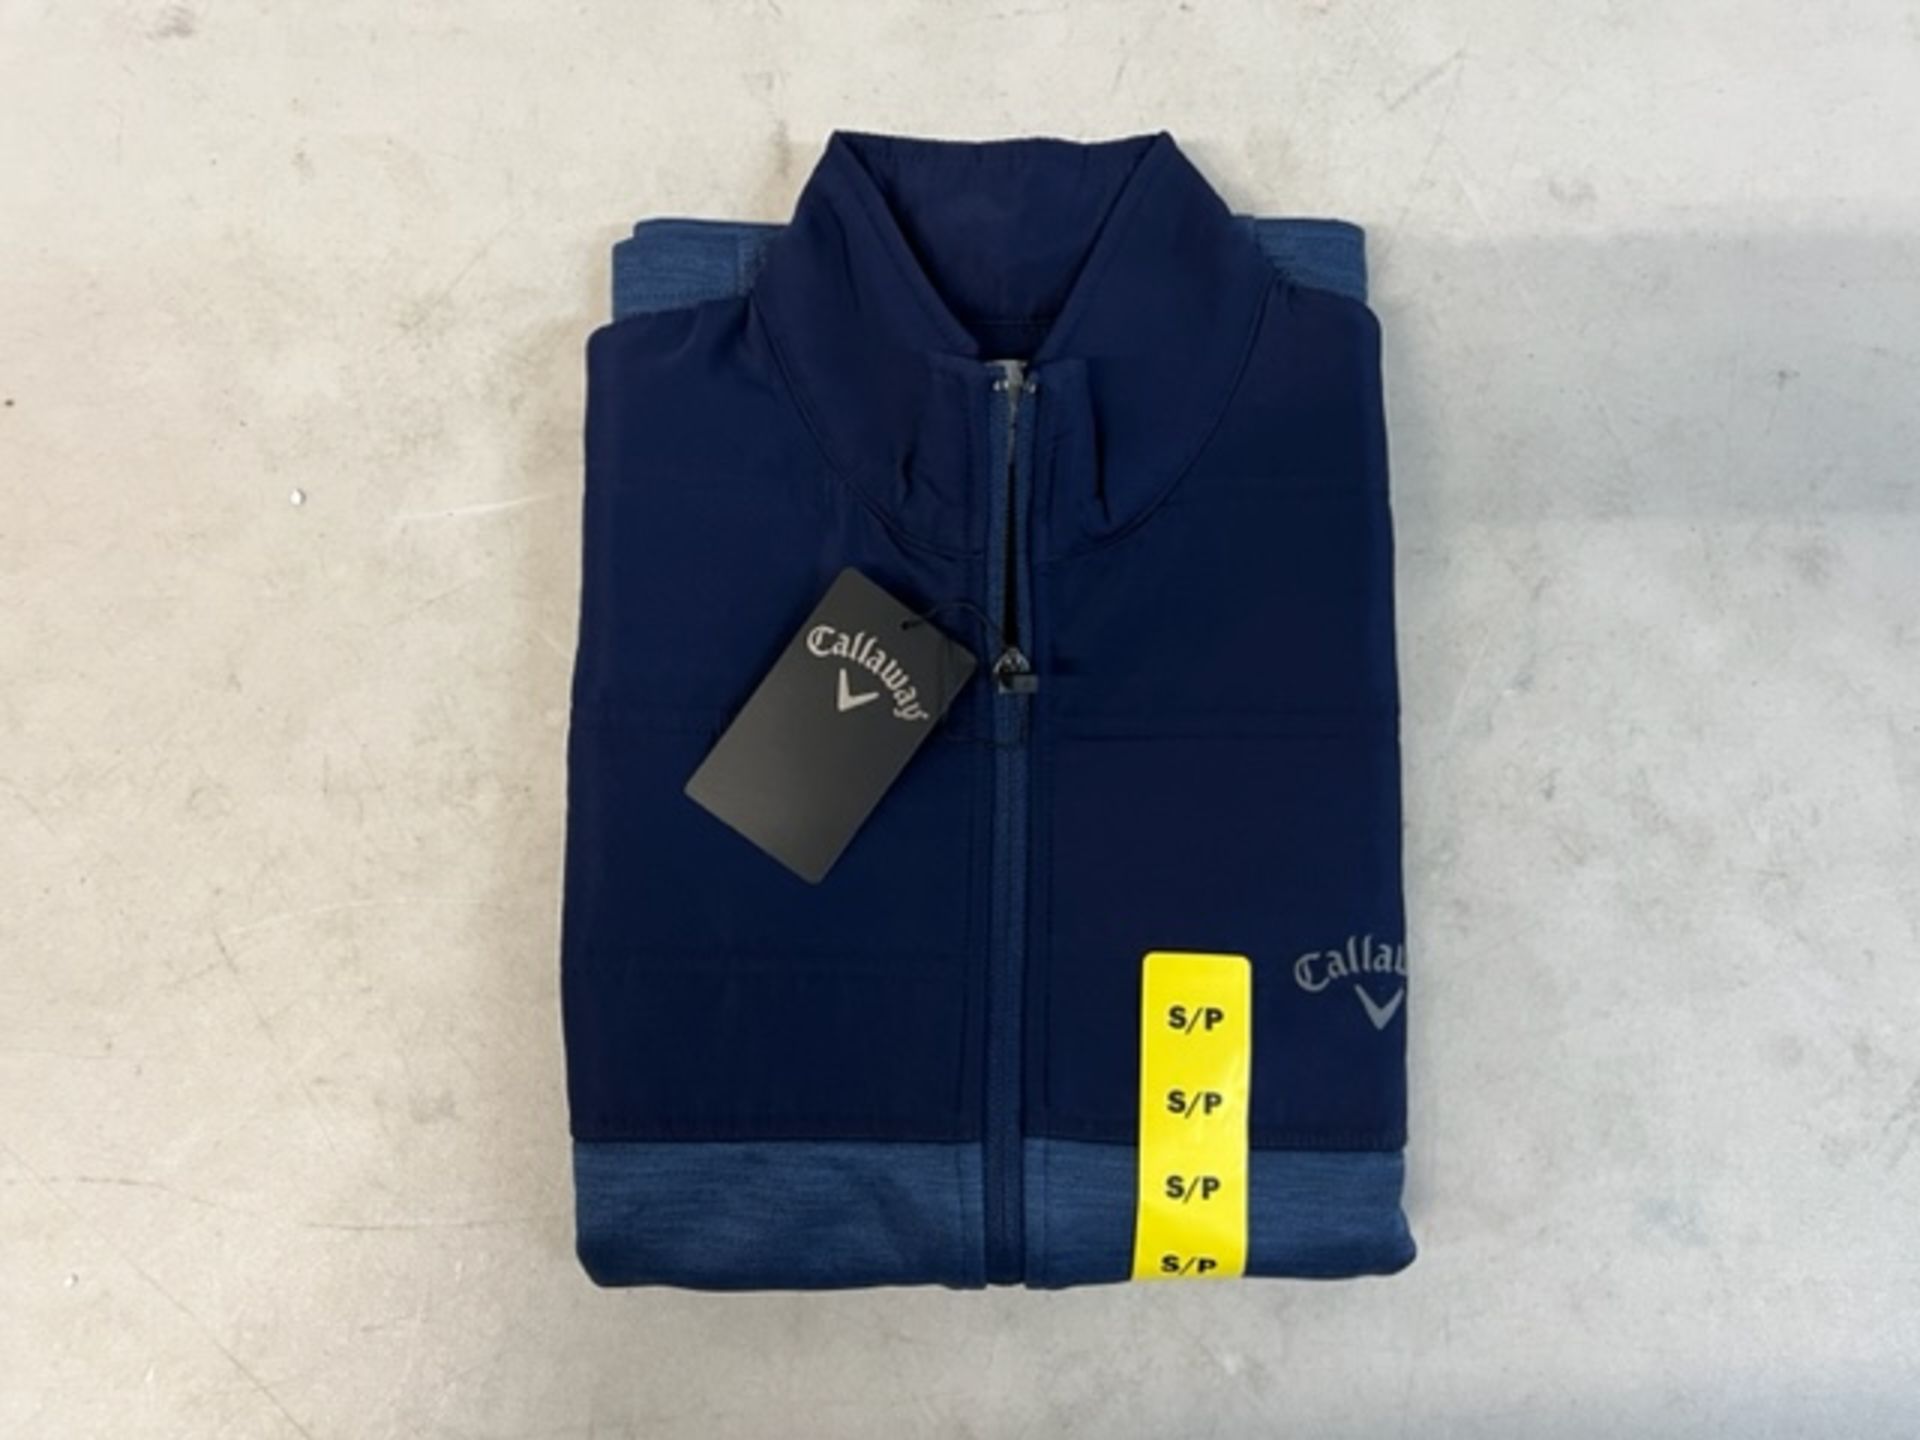 1 BRAND NEW CALLAWAY GOLF GILLETTE IN NAVY SIZE S RRP Â£29